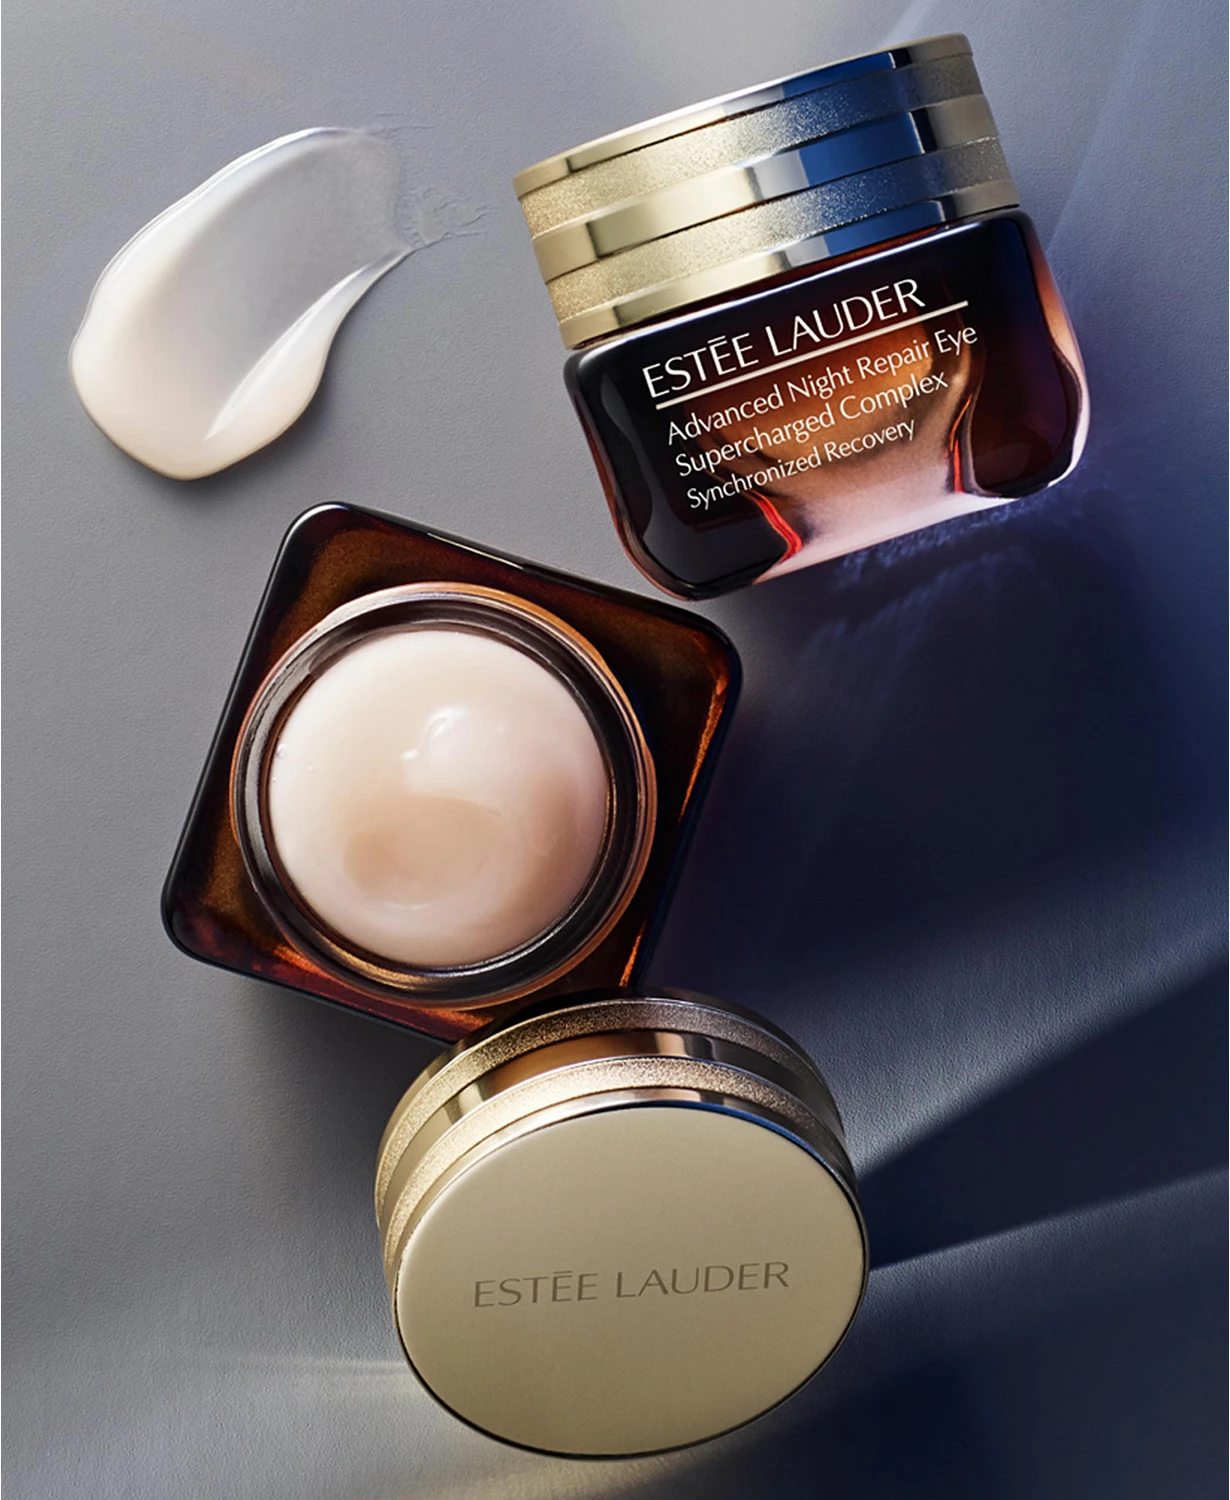 Macy’s: Two of these Estée Lauder Advanced Night Repair Eye Supercharged Complex Synchronized Recovery for $66 